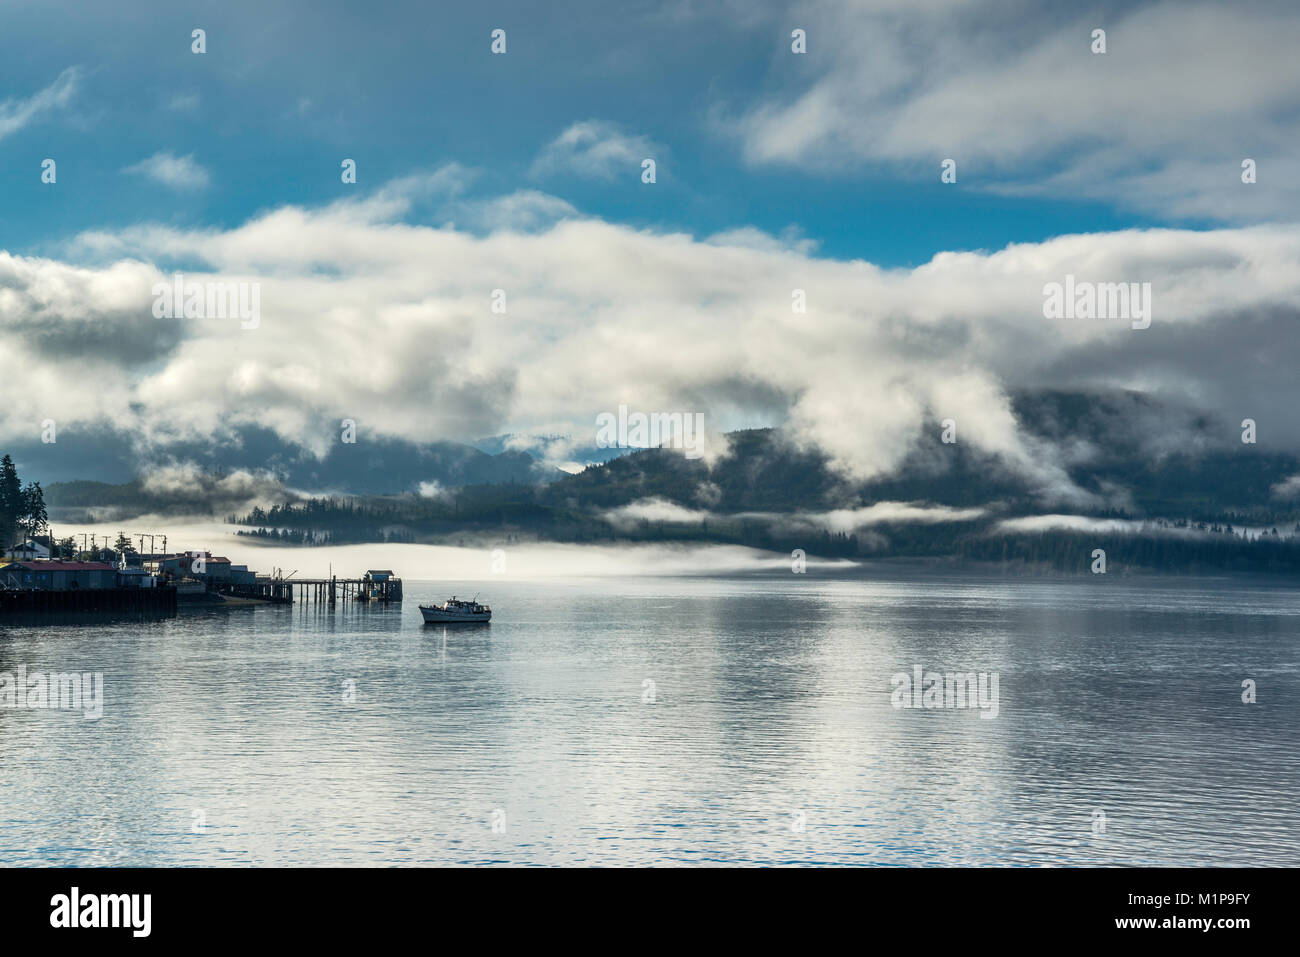 Broughton Strait between Cormorant Island and Vancouver Island, shrouded with clouds, from ferry on its way to Alert Bay, British Columbia, Canada Stock Photo